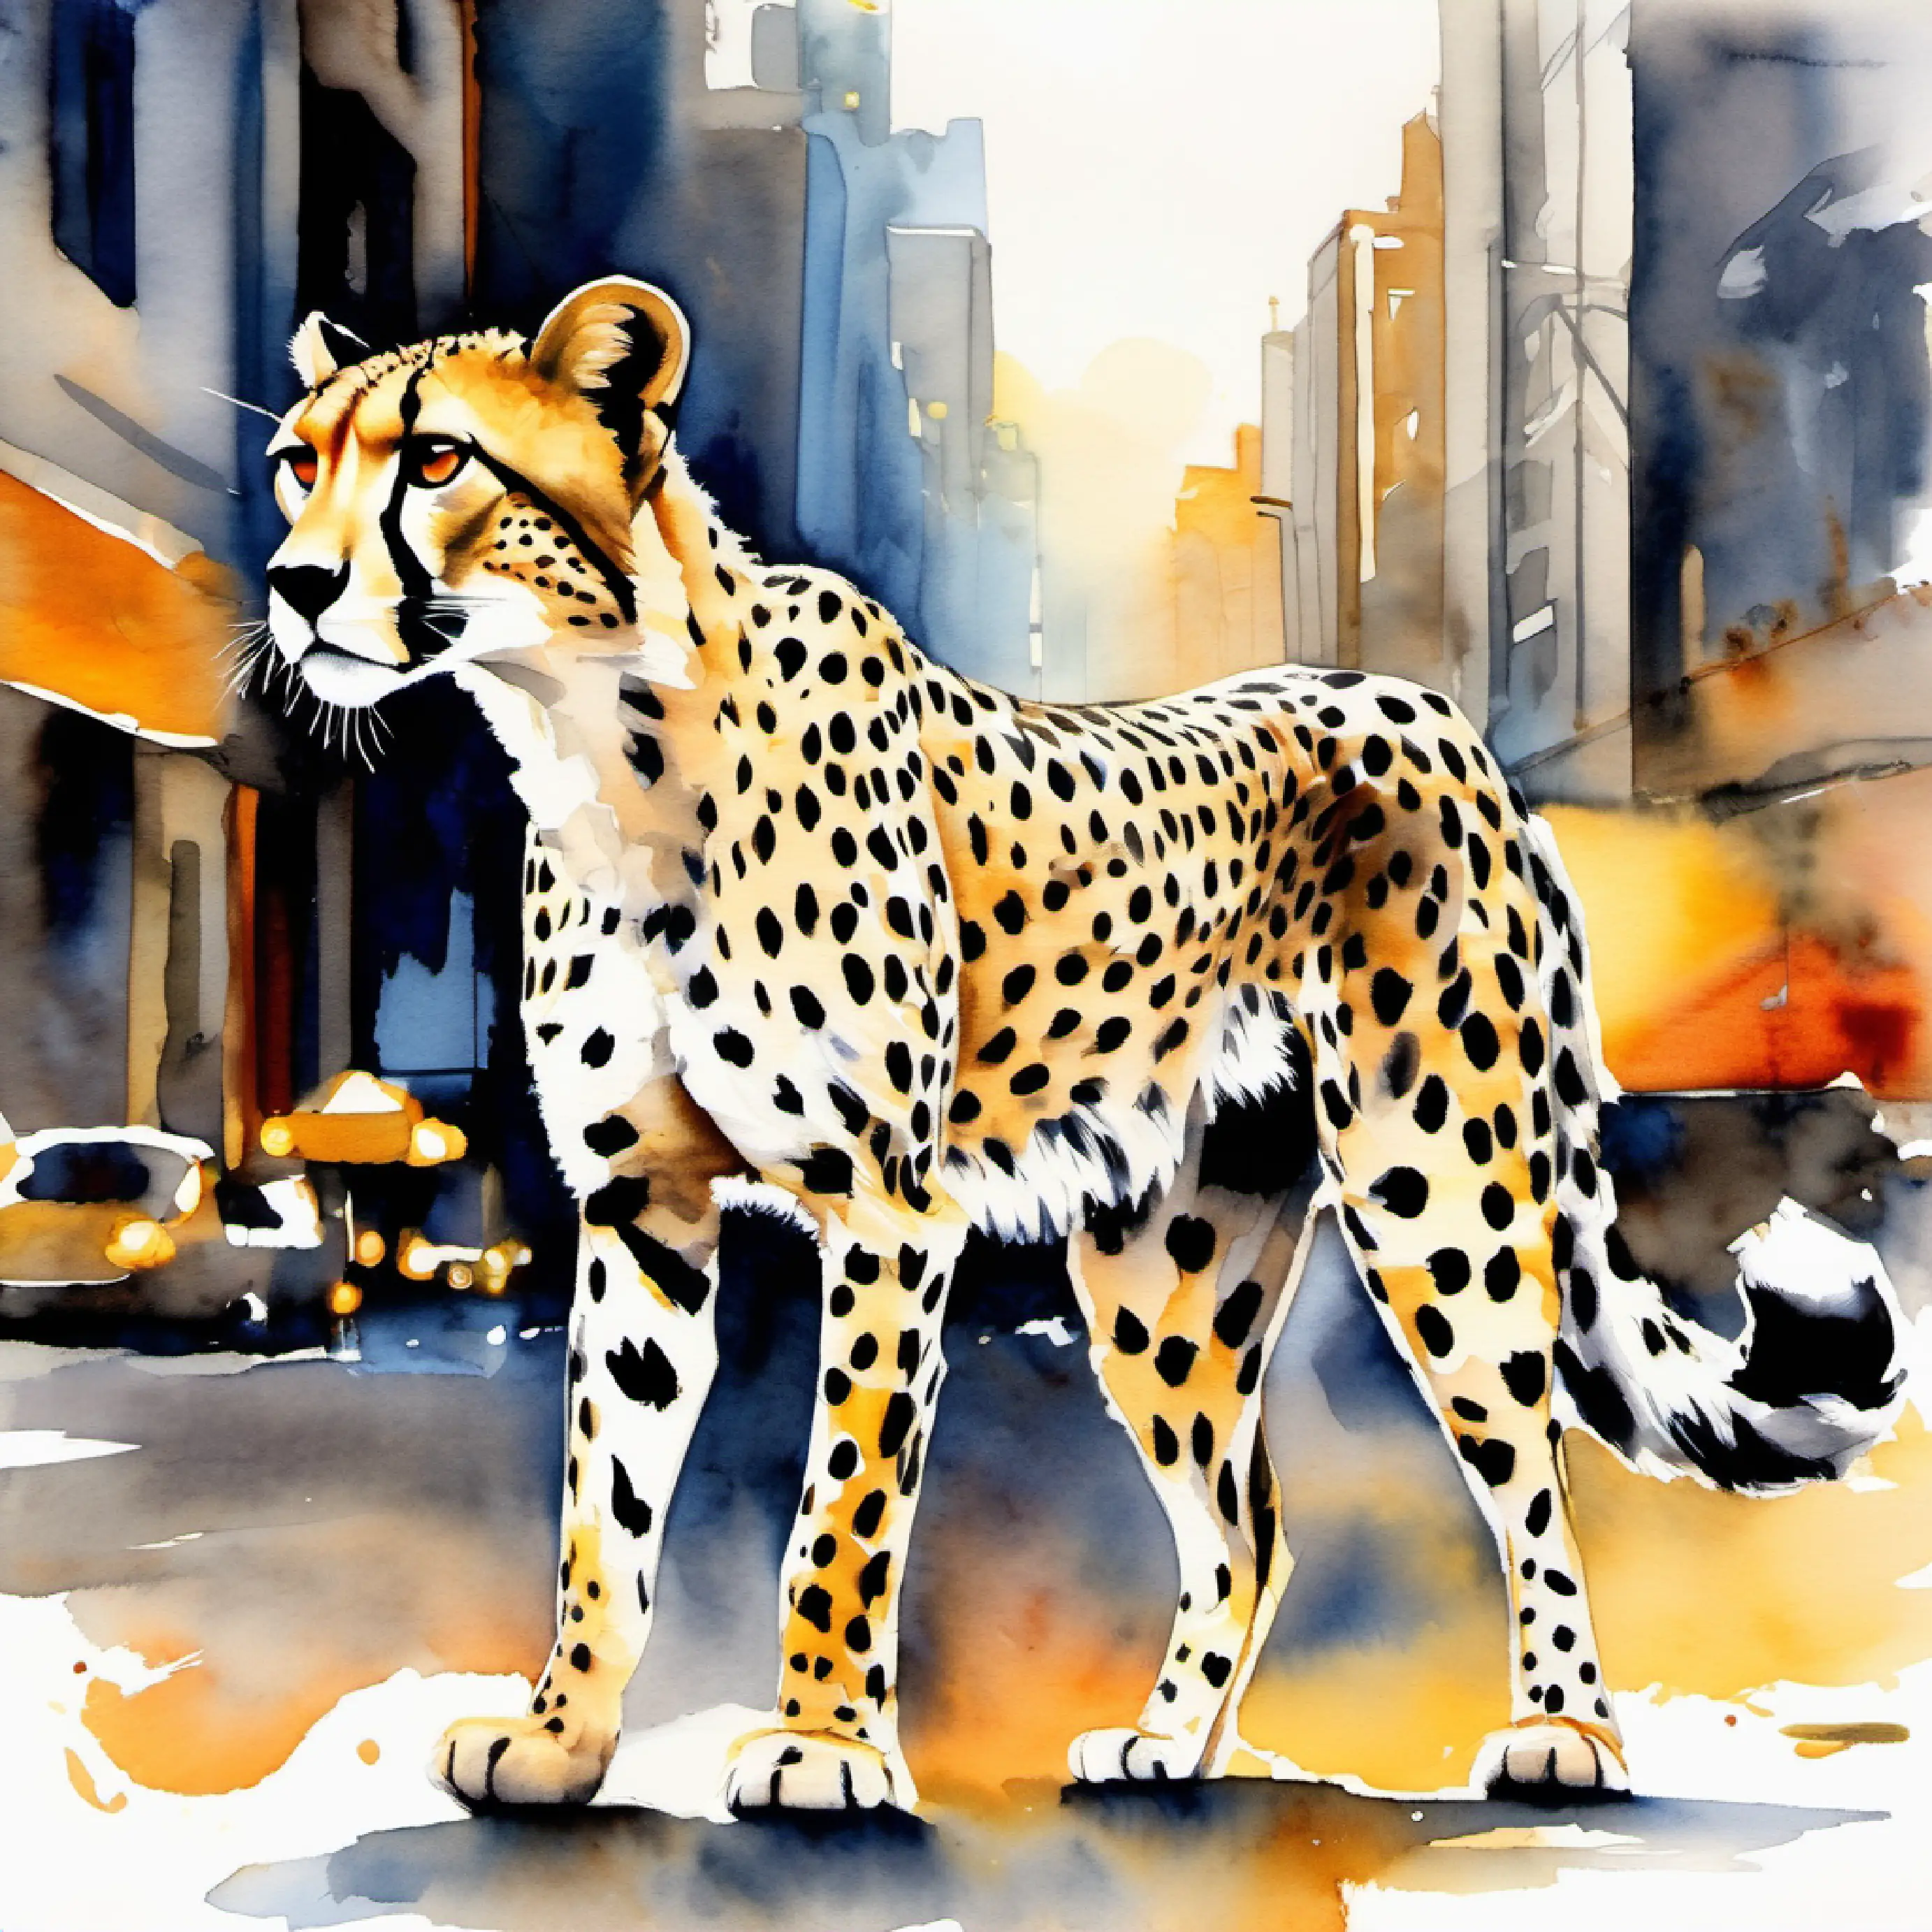 Spotted cheetah, agile, with alert golden eyes wandering through the busy city.